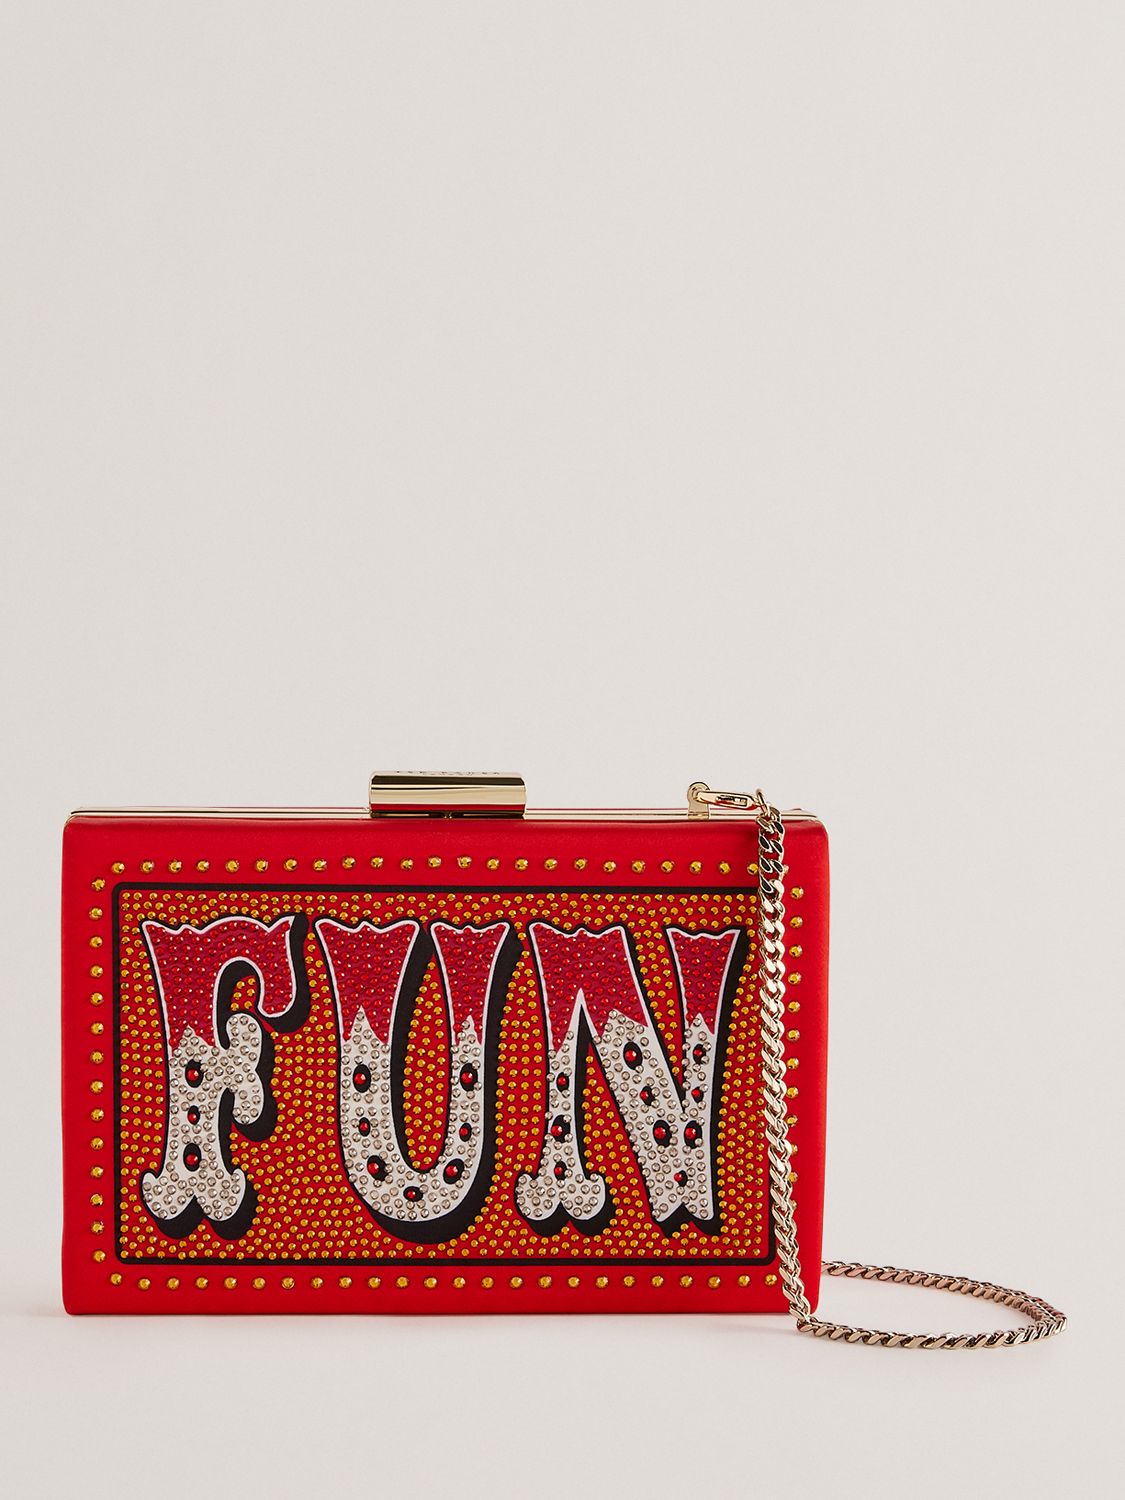 Ted Baker Funia Fun Slogan Embellished Box Clutch Bag, Red, One Size